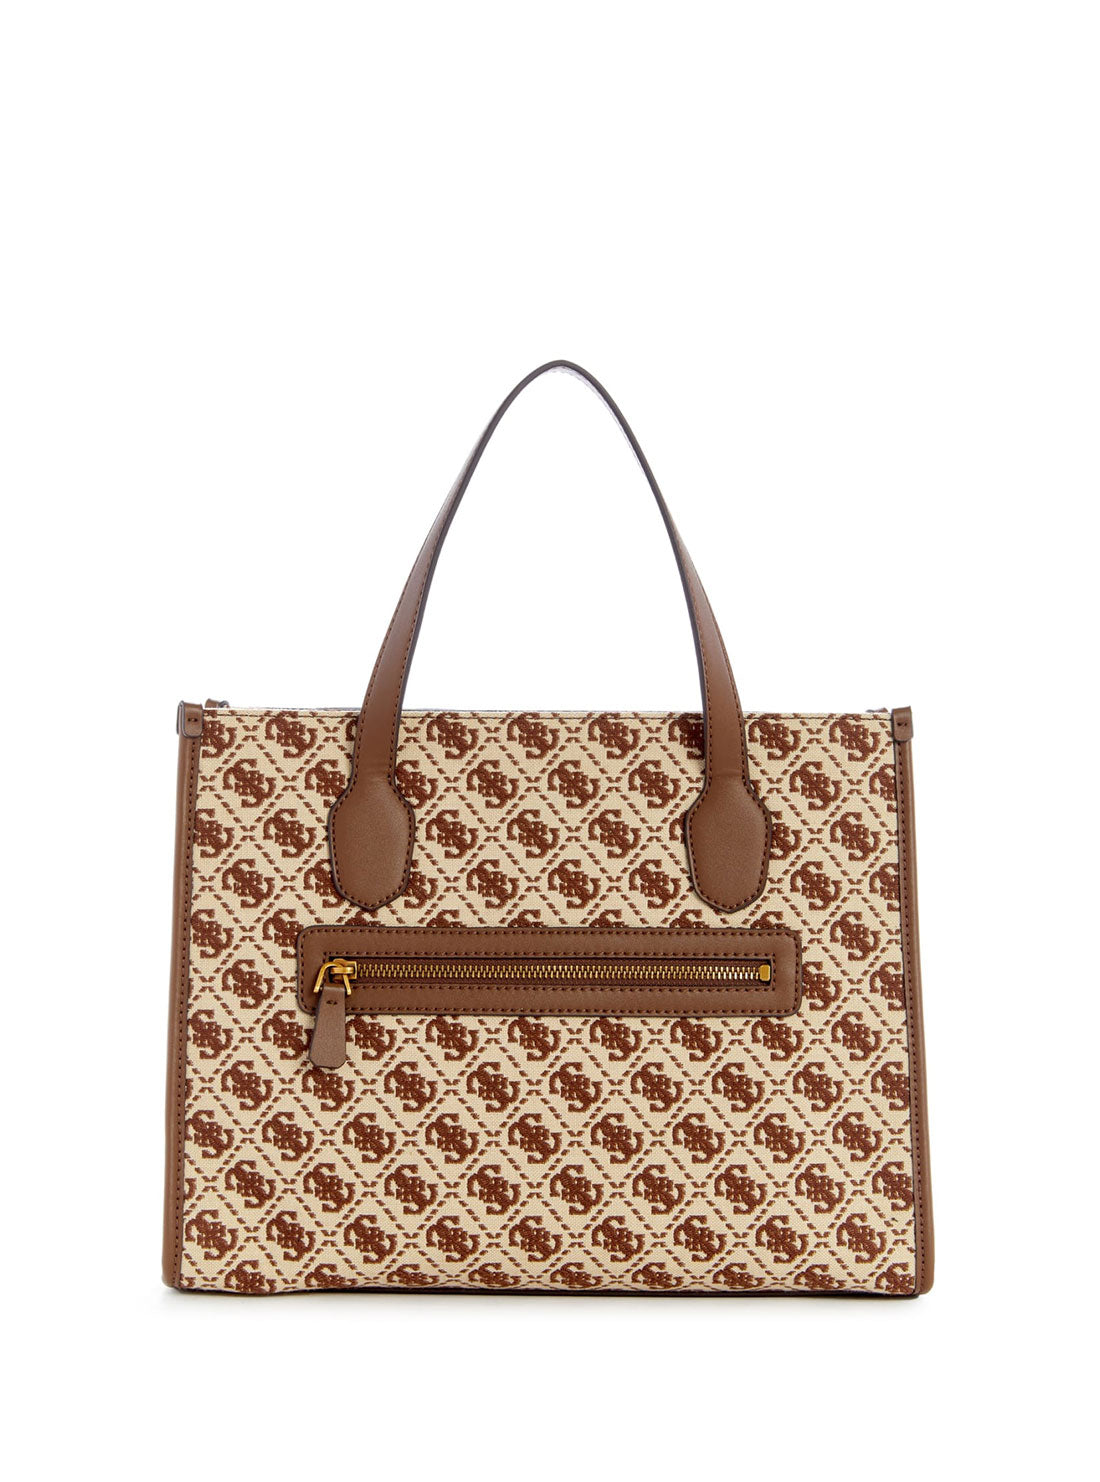 GUESS Women's Brown Logo Izzy Tote Bag JB865422 Back View